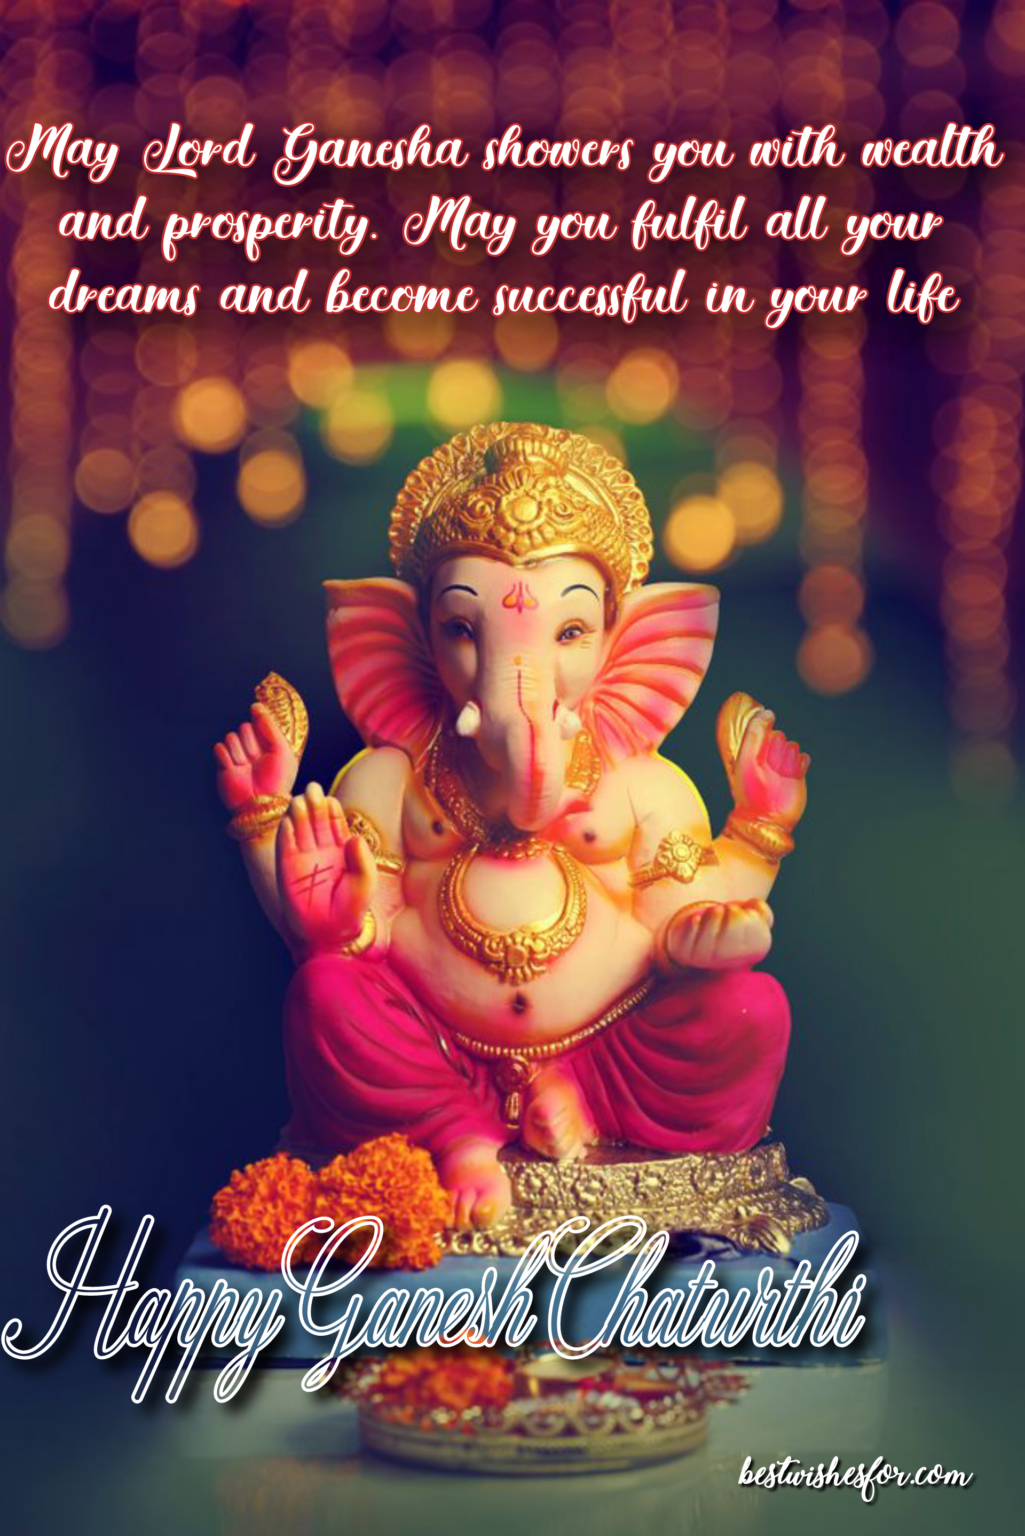 Happy Ganesh Chaturthi 2021 Wishes Quotes Images Messages And Sayings Best Wishes 8520